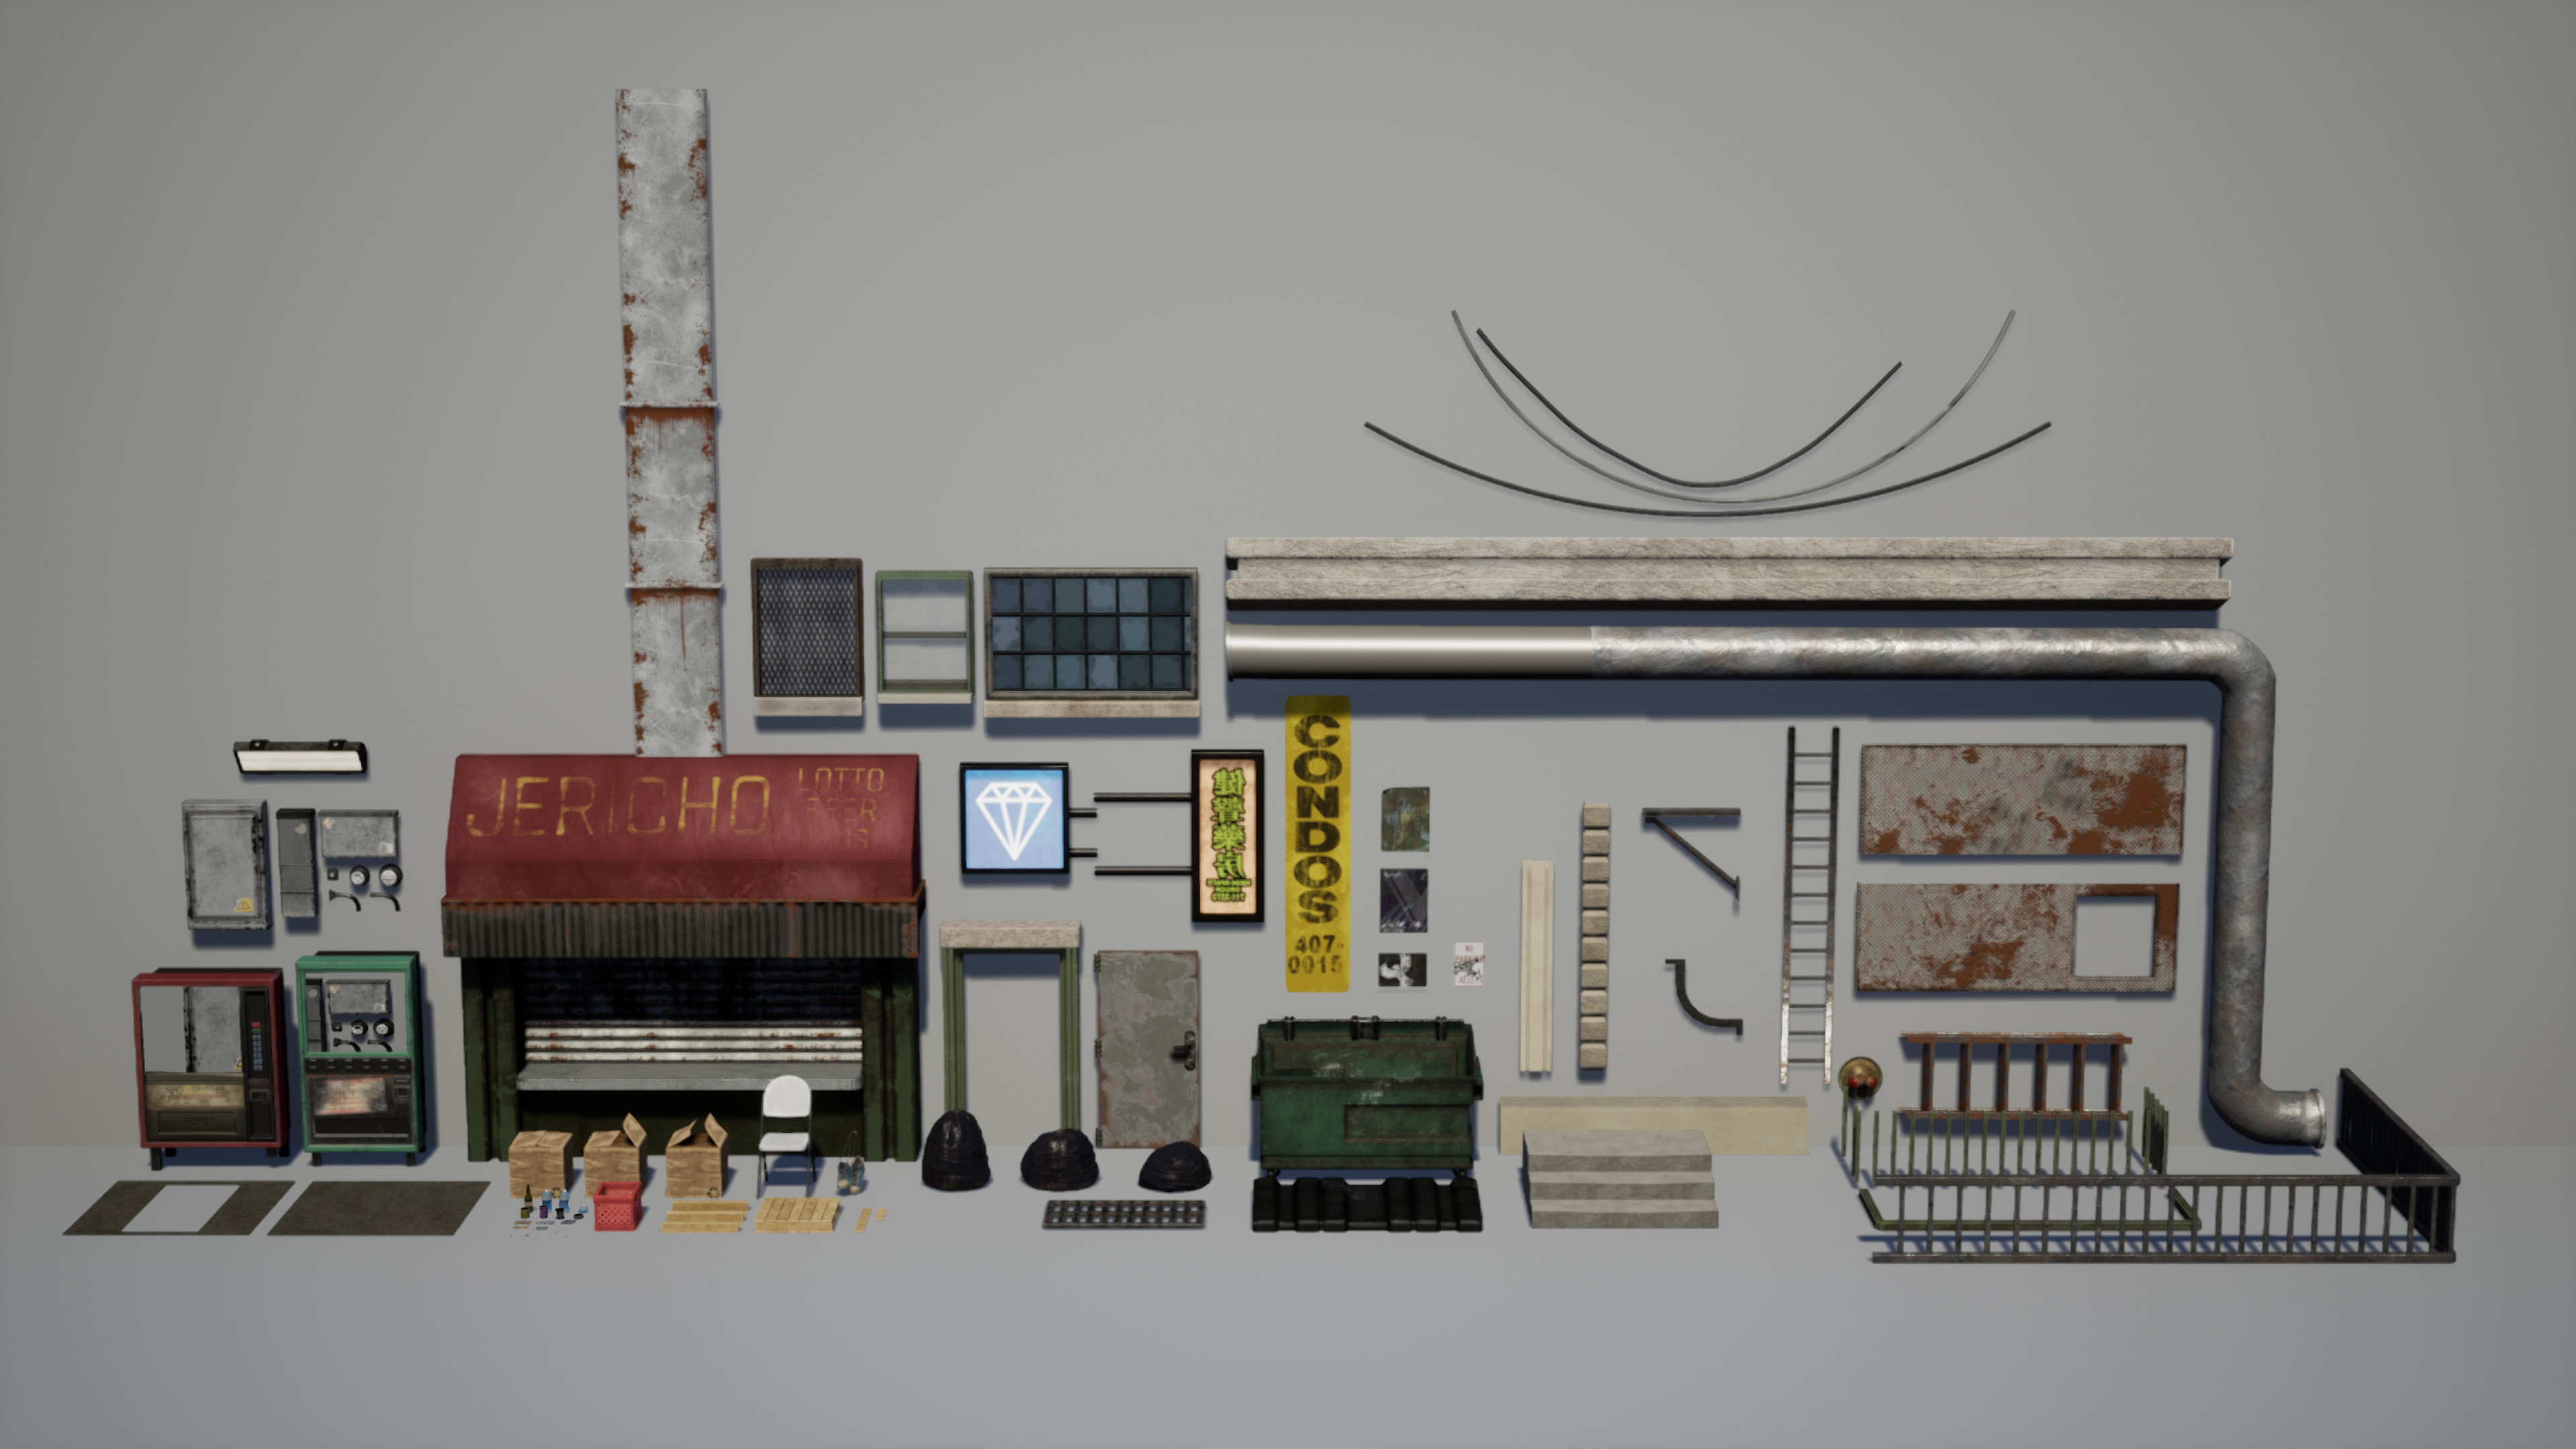 Modular Assets
This project gave me the opportunity to create modular props and other assets to use within the scene. 